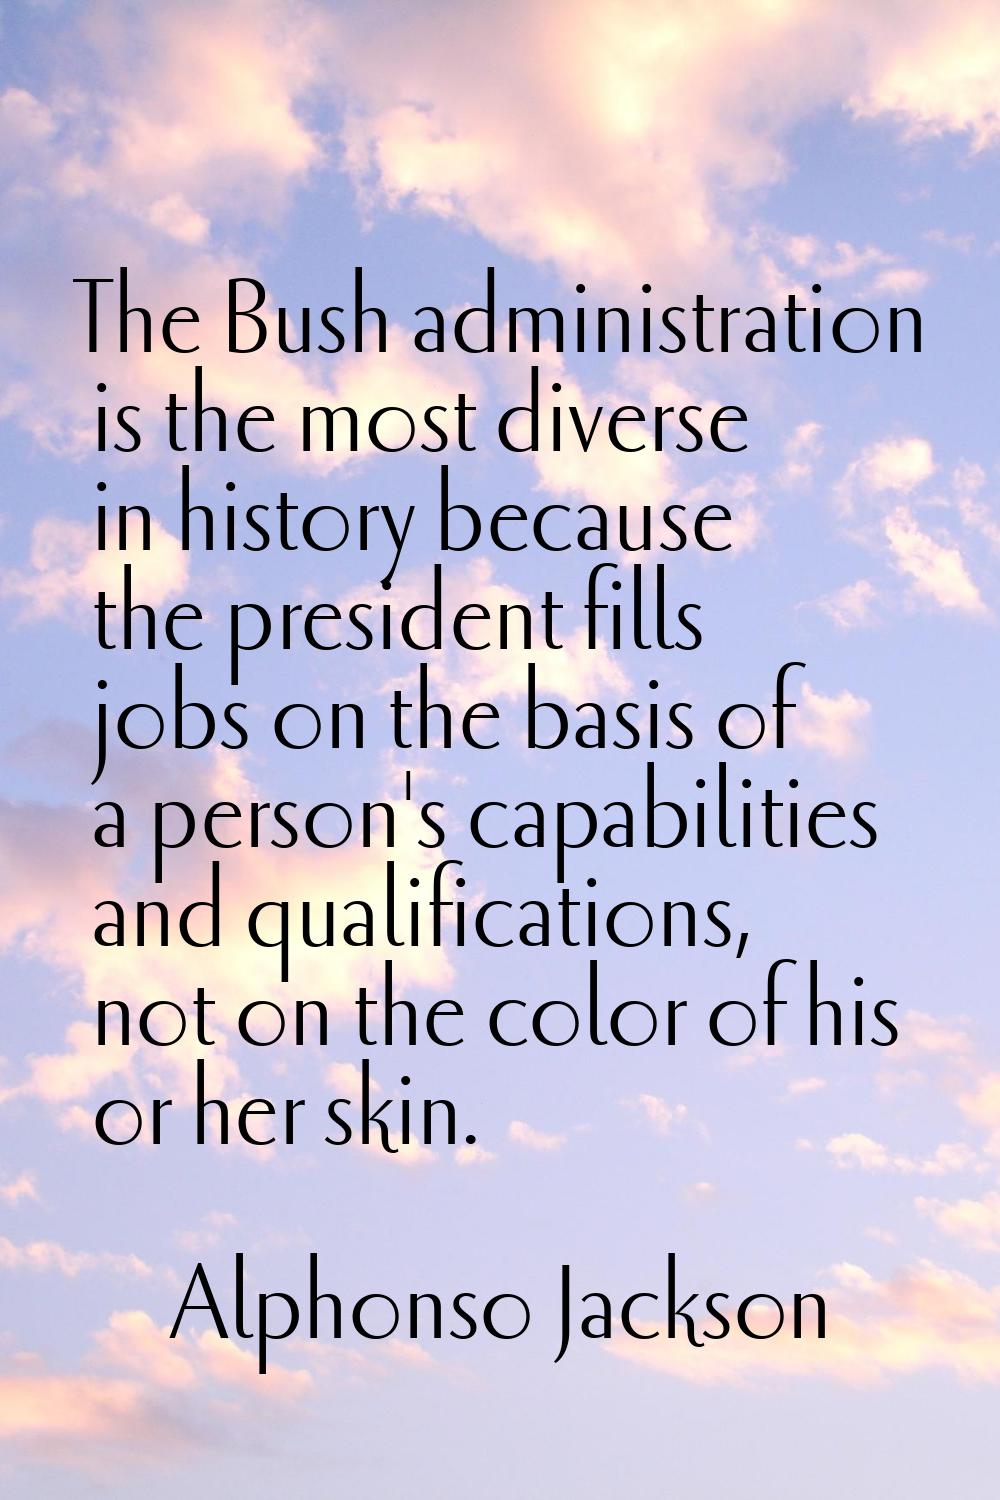 The Bush administration is the most diverse in history because the president fills jobs on the basi